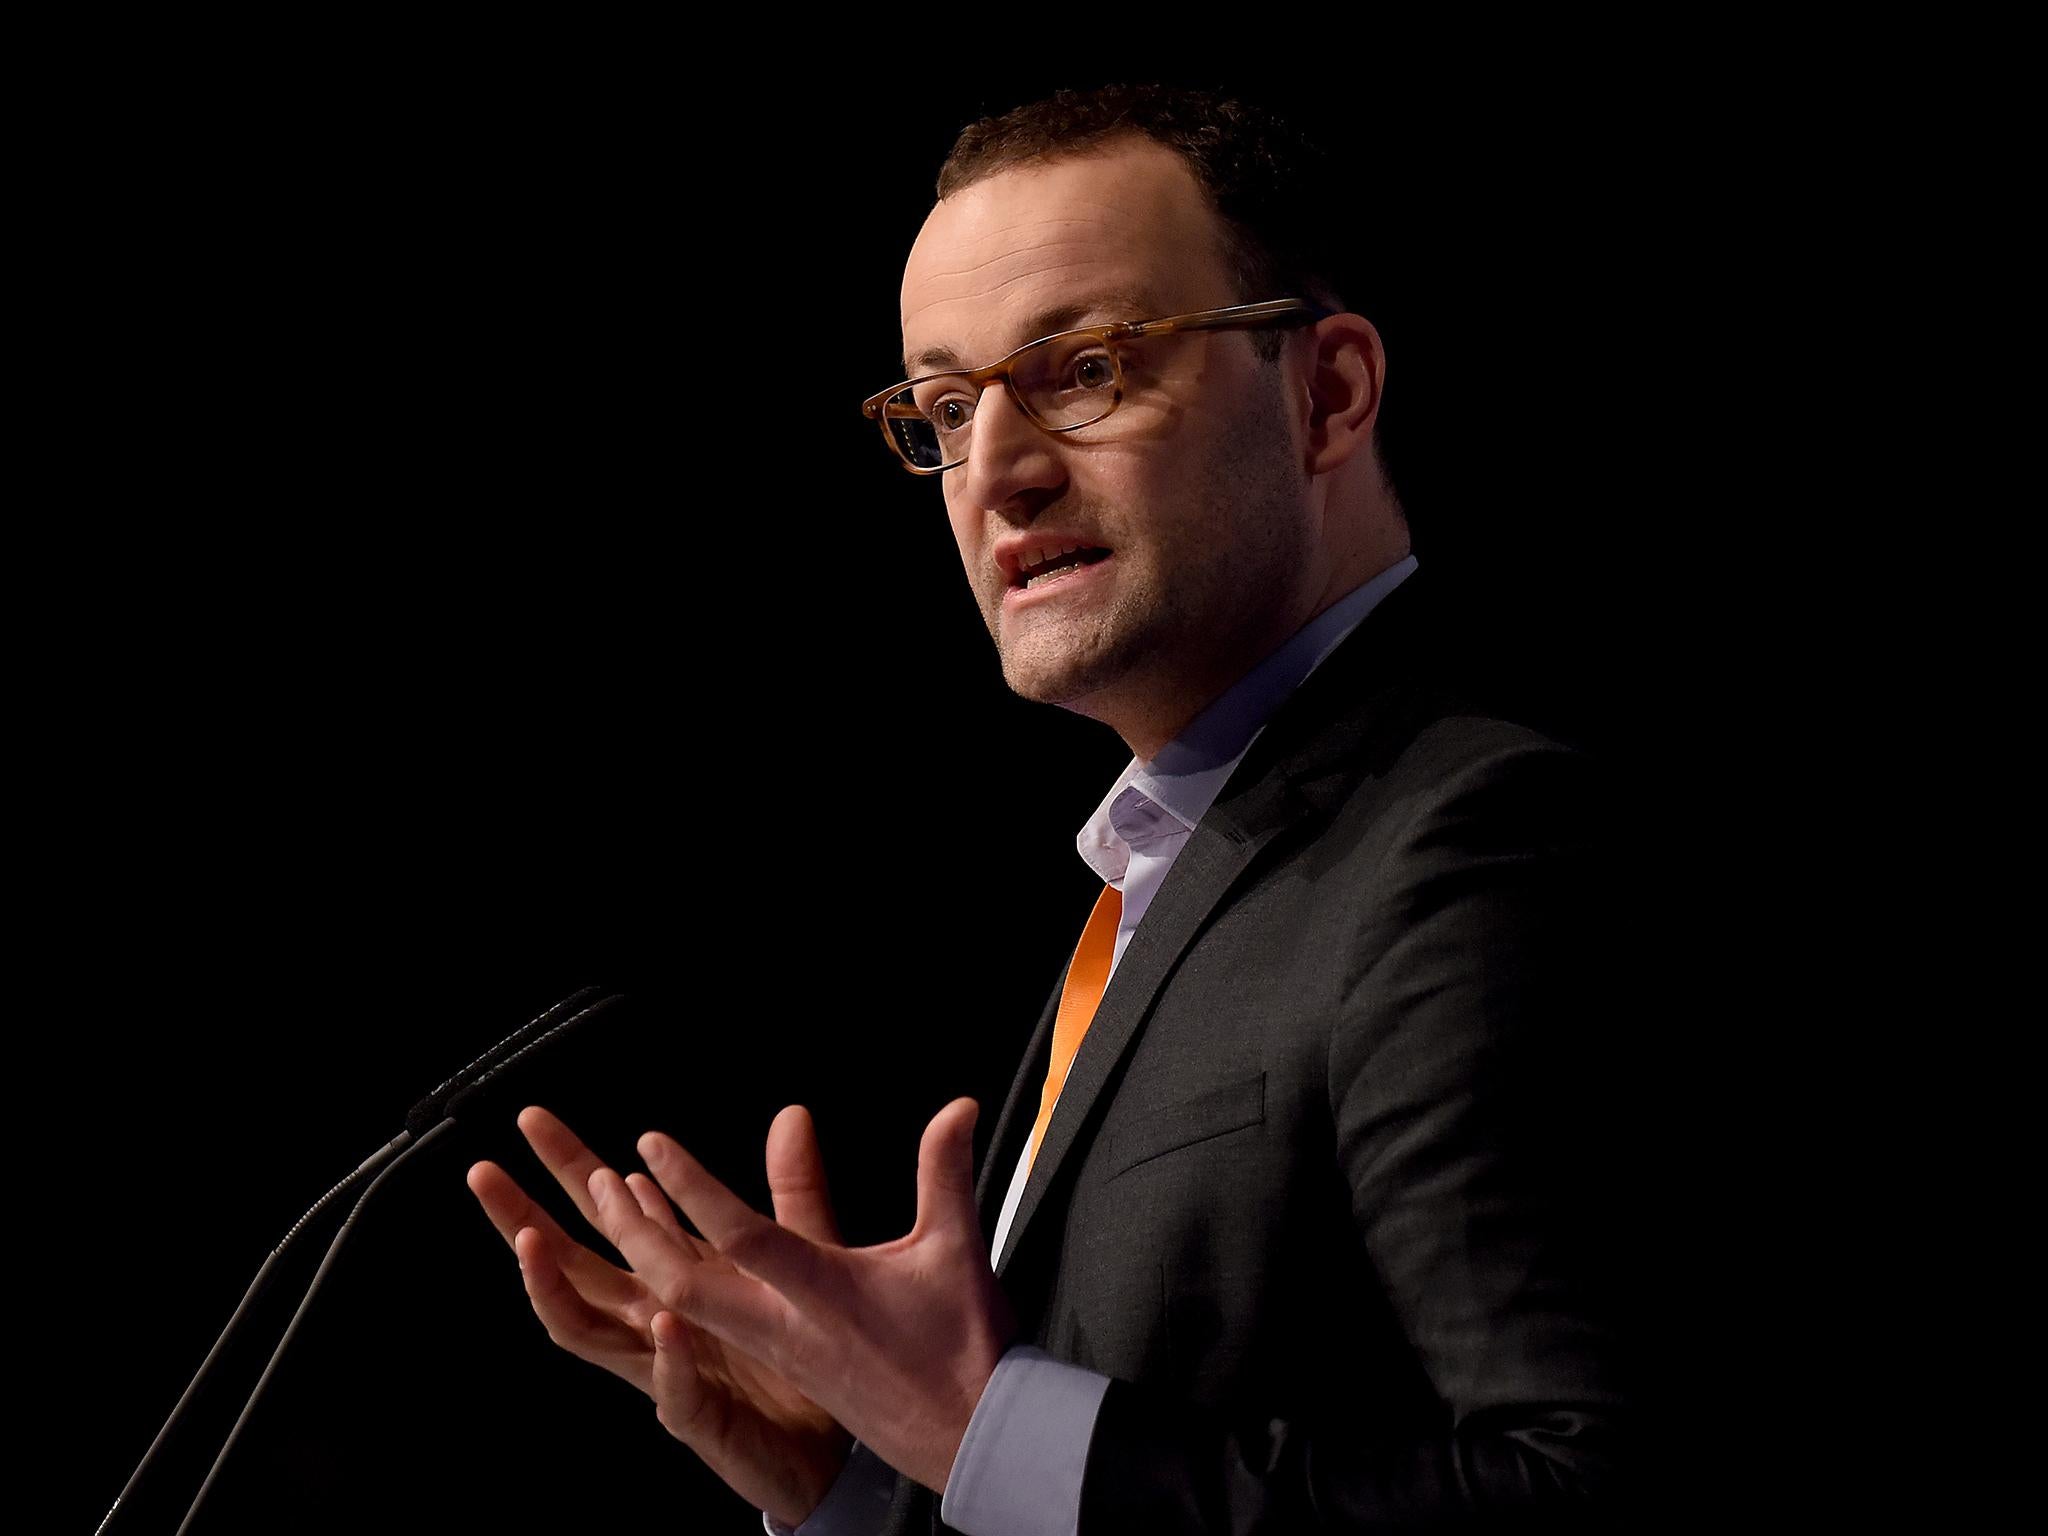 Germany’s deputy finance minister Jens Spahn argues that the focus in Greece must be on addressing lack of growth